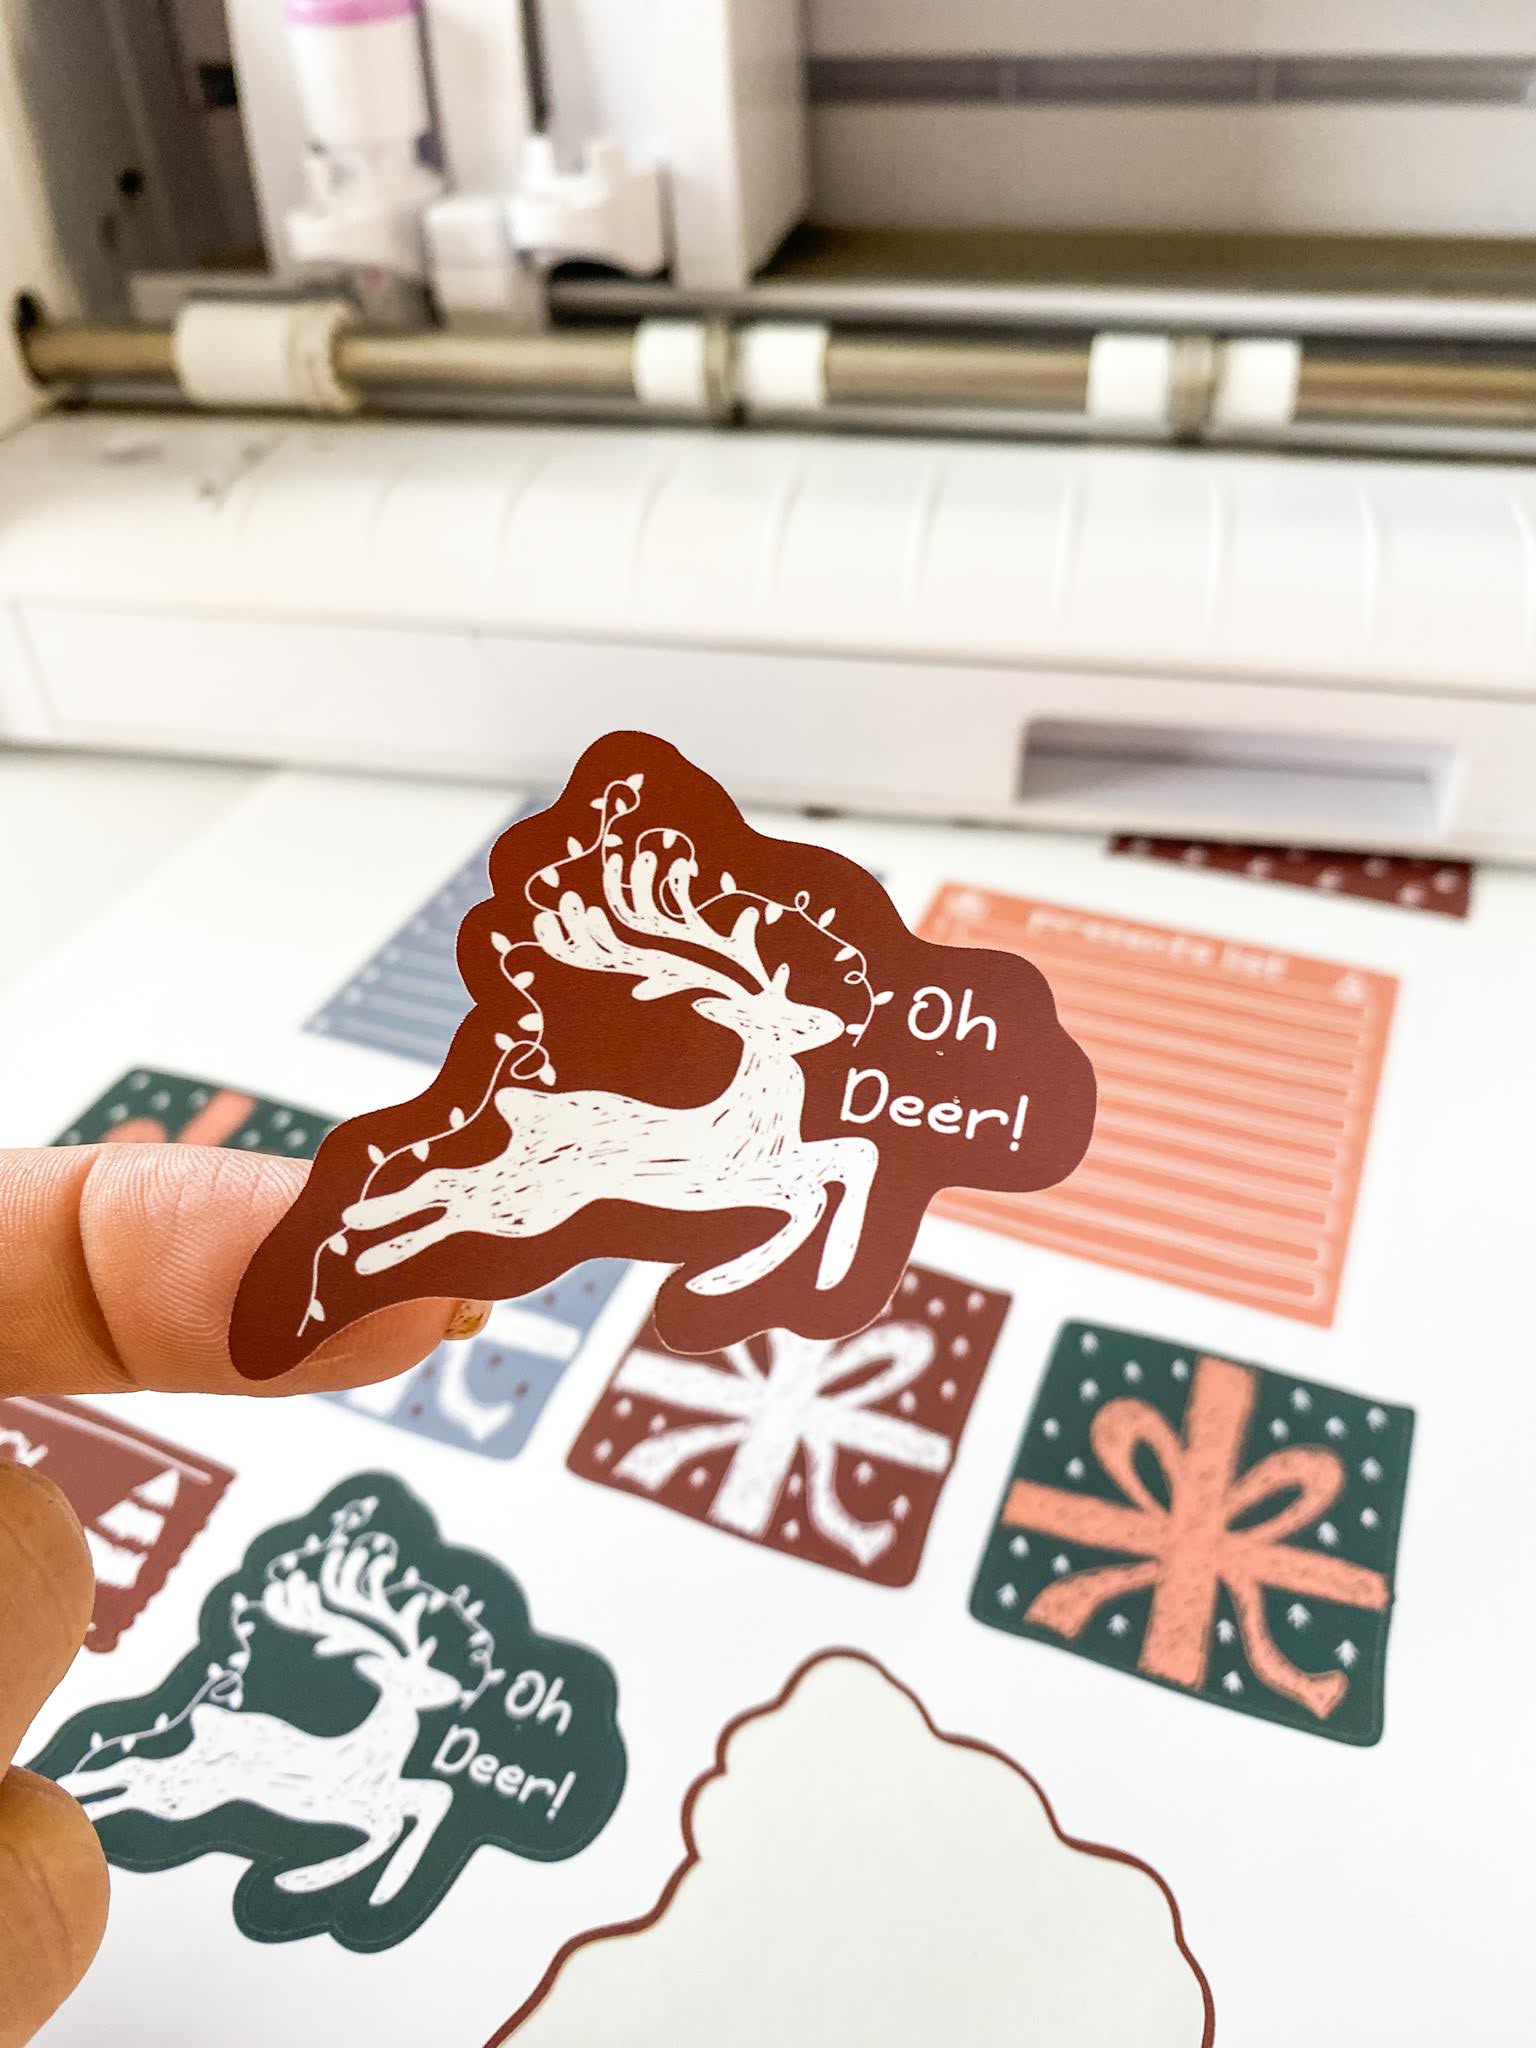 How to Make Waterproof Stickers with Silhouette CAMEO or Portrait -  Silhouette School